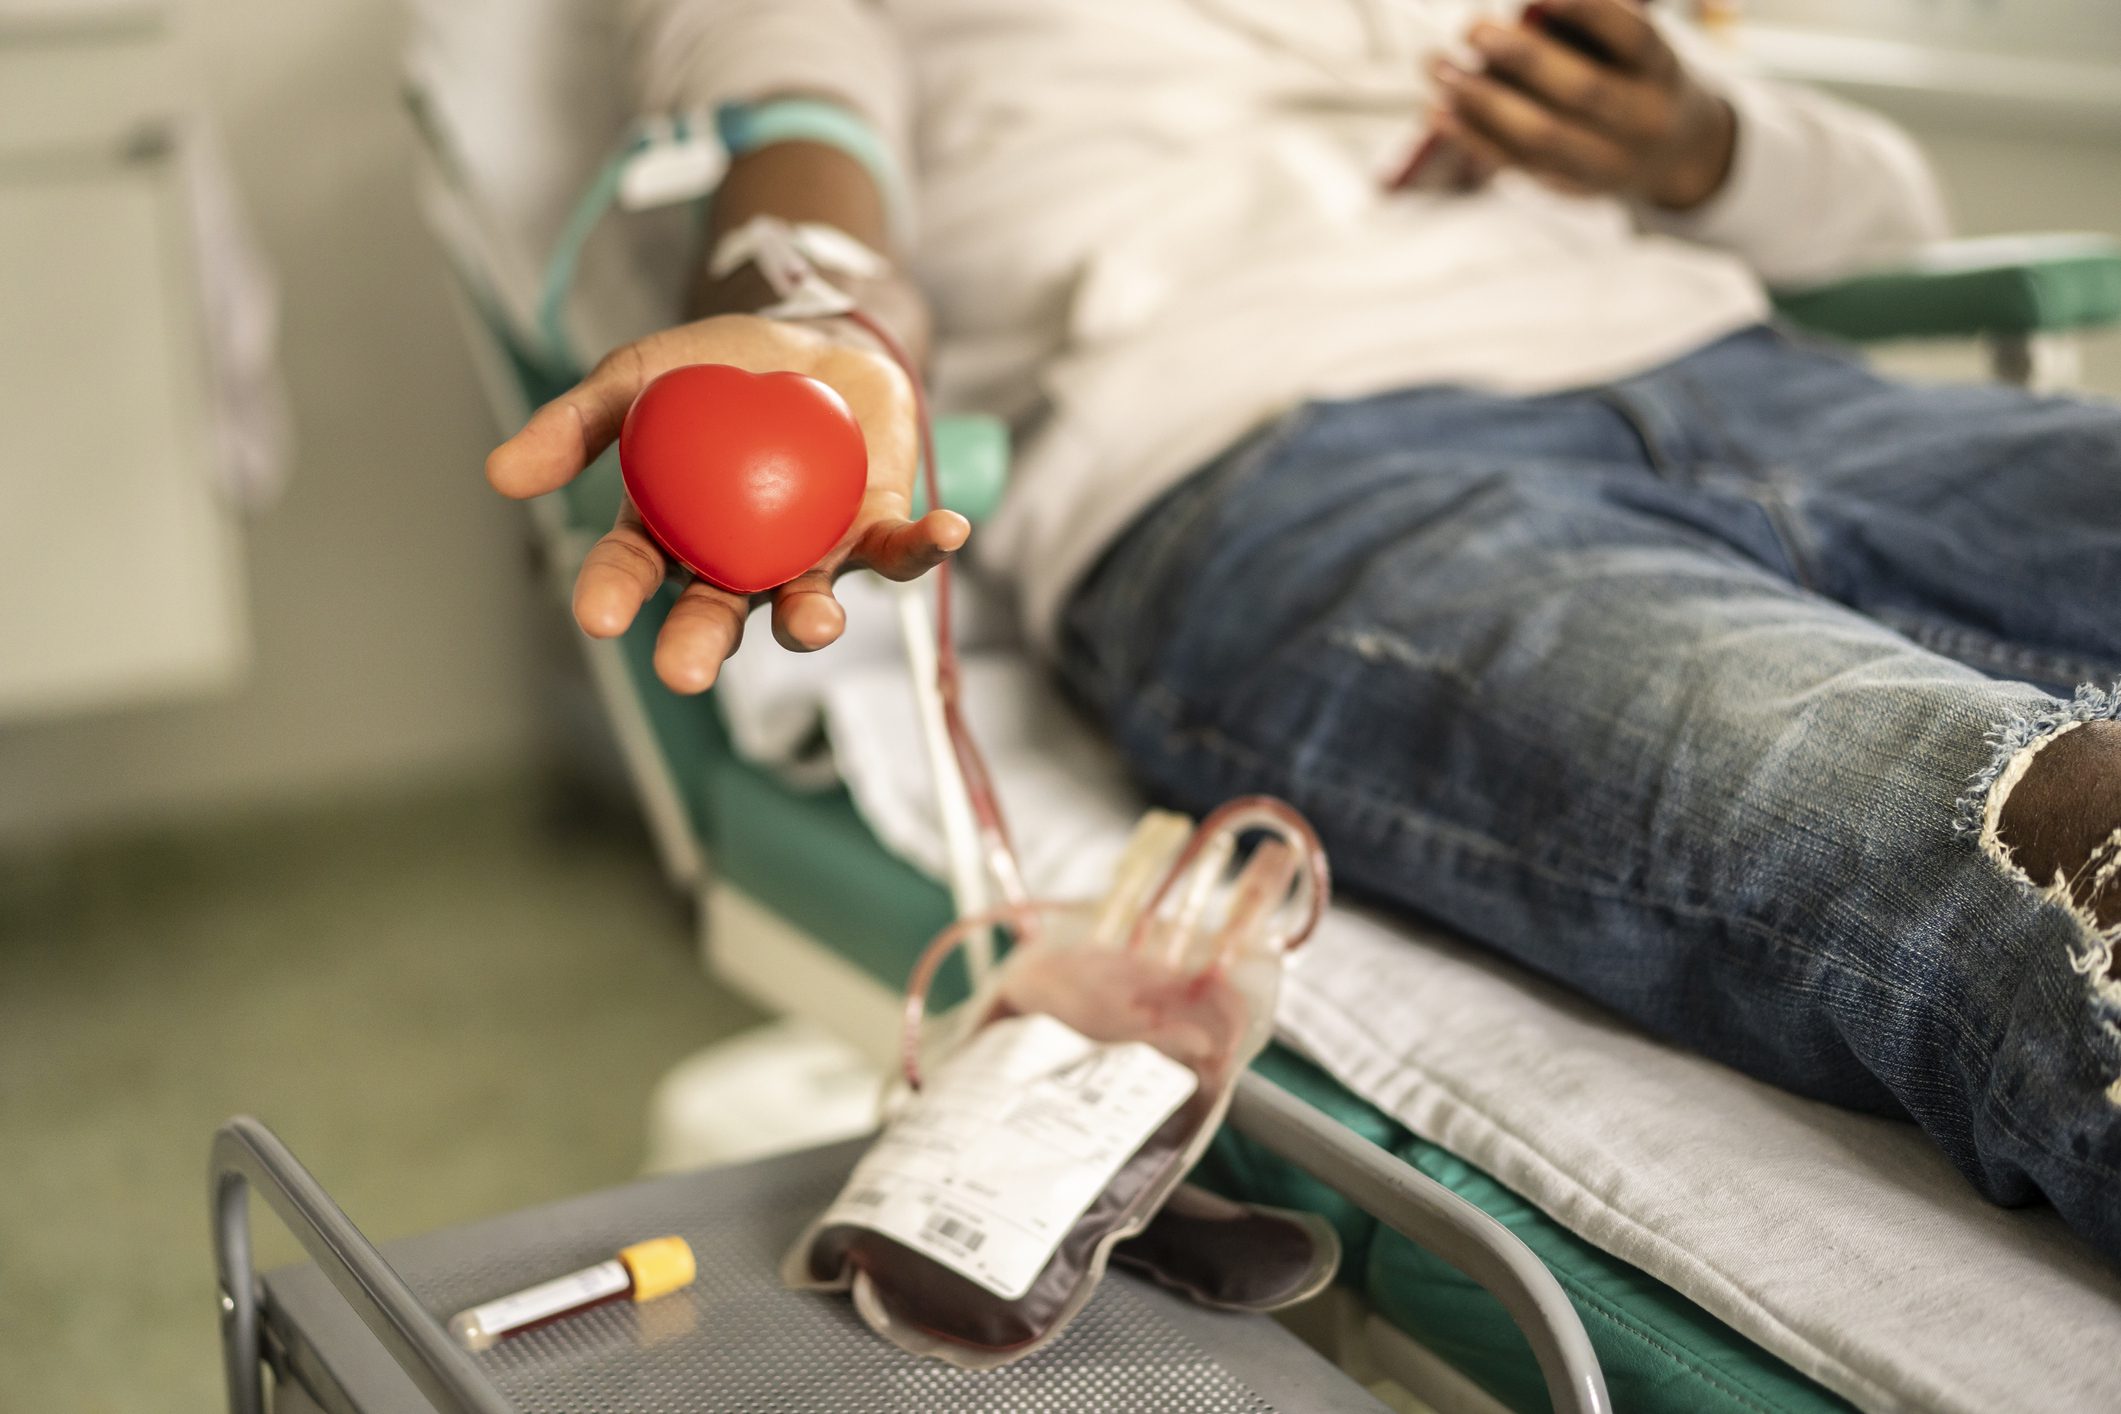 Donor squeezing the heart-shaped ball during blood donation